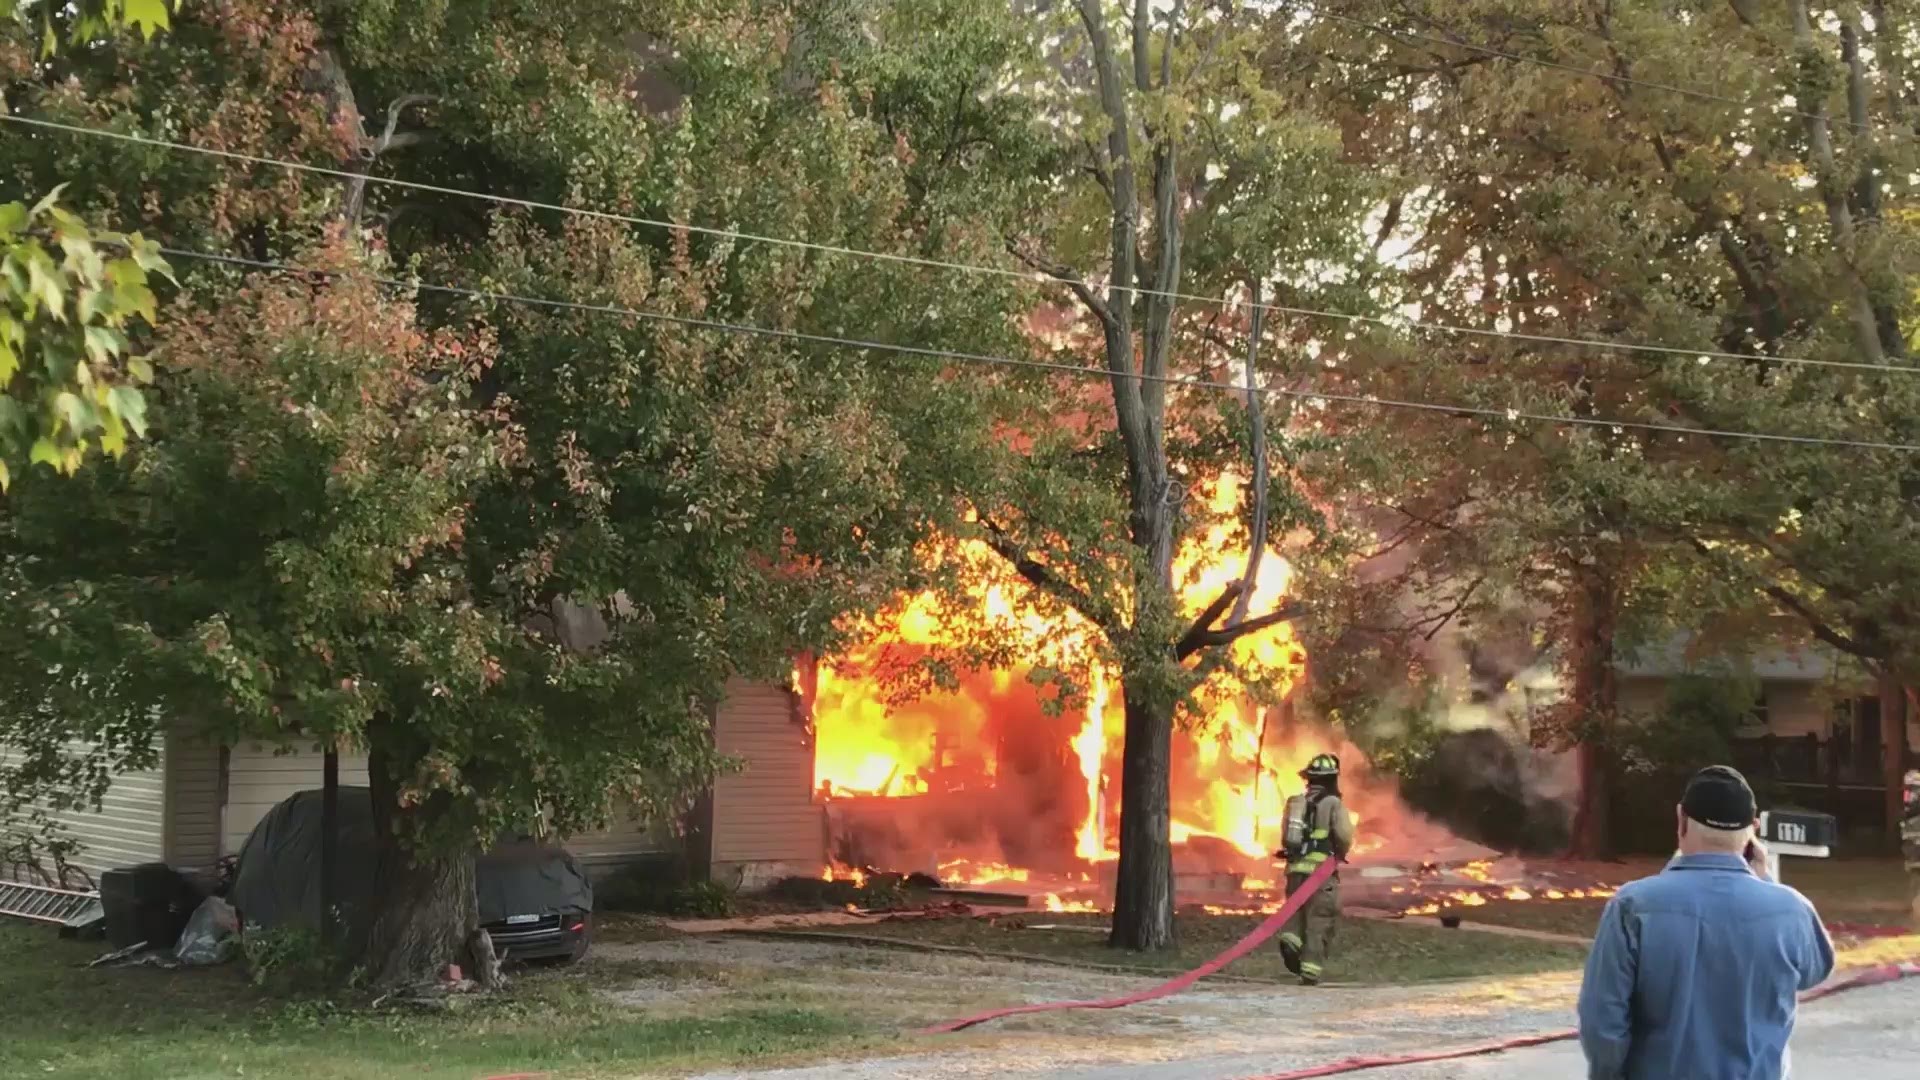 A couple lost their home in an explosion in Columbia early Friday morning.